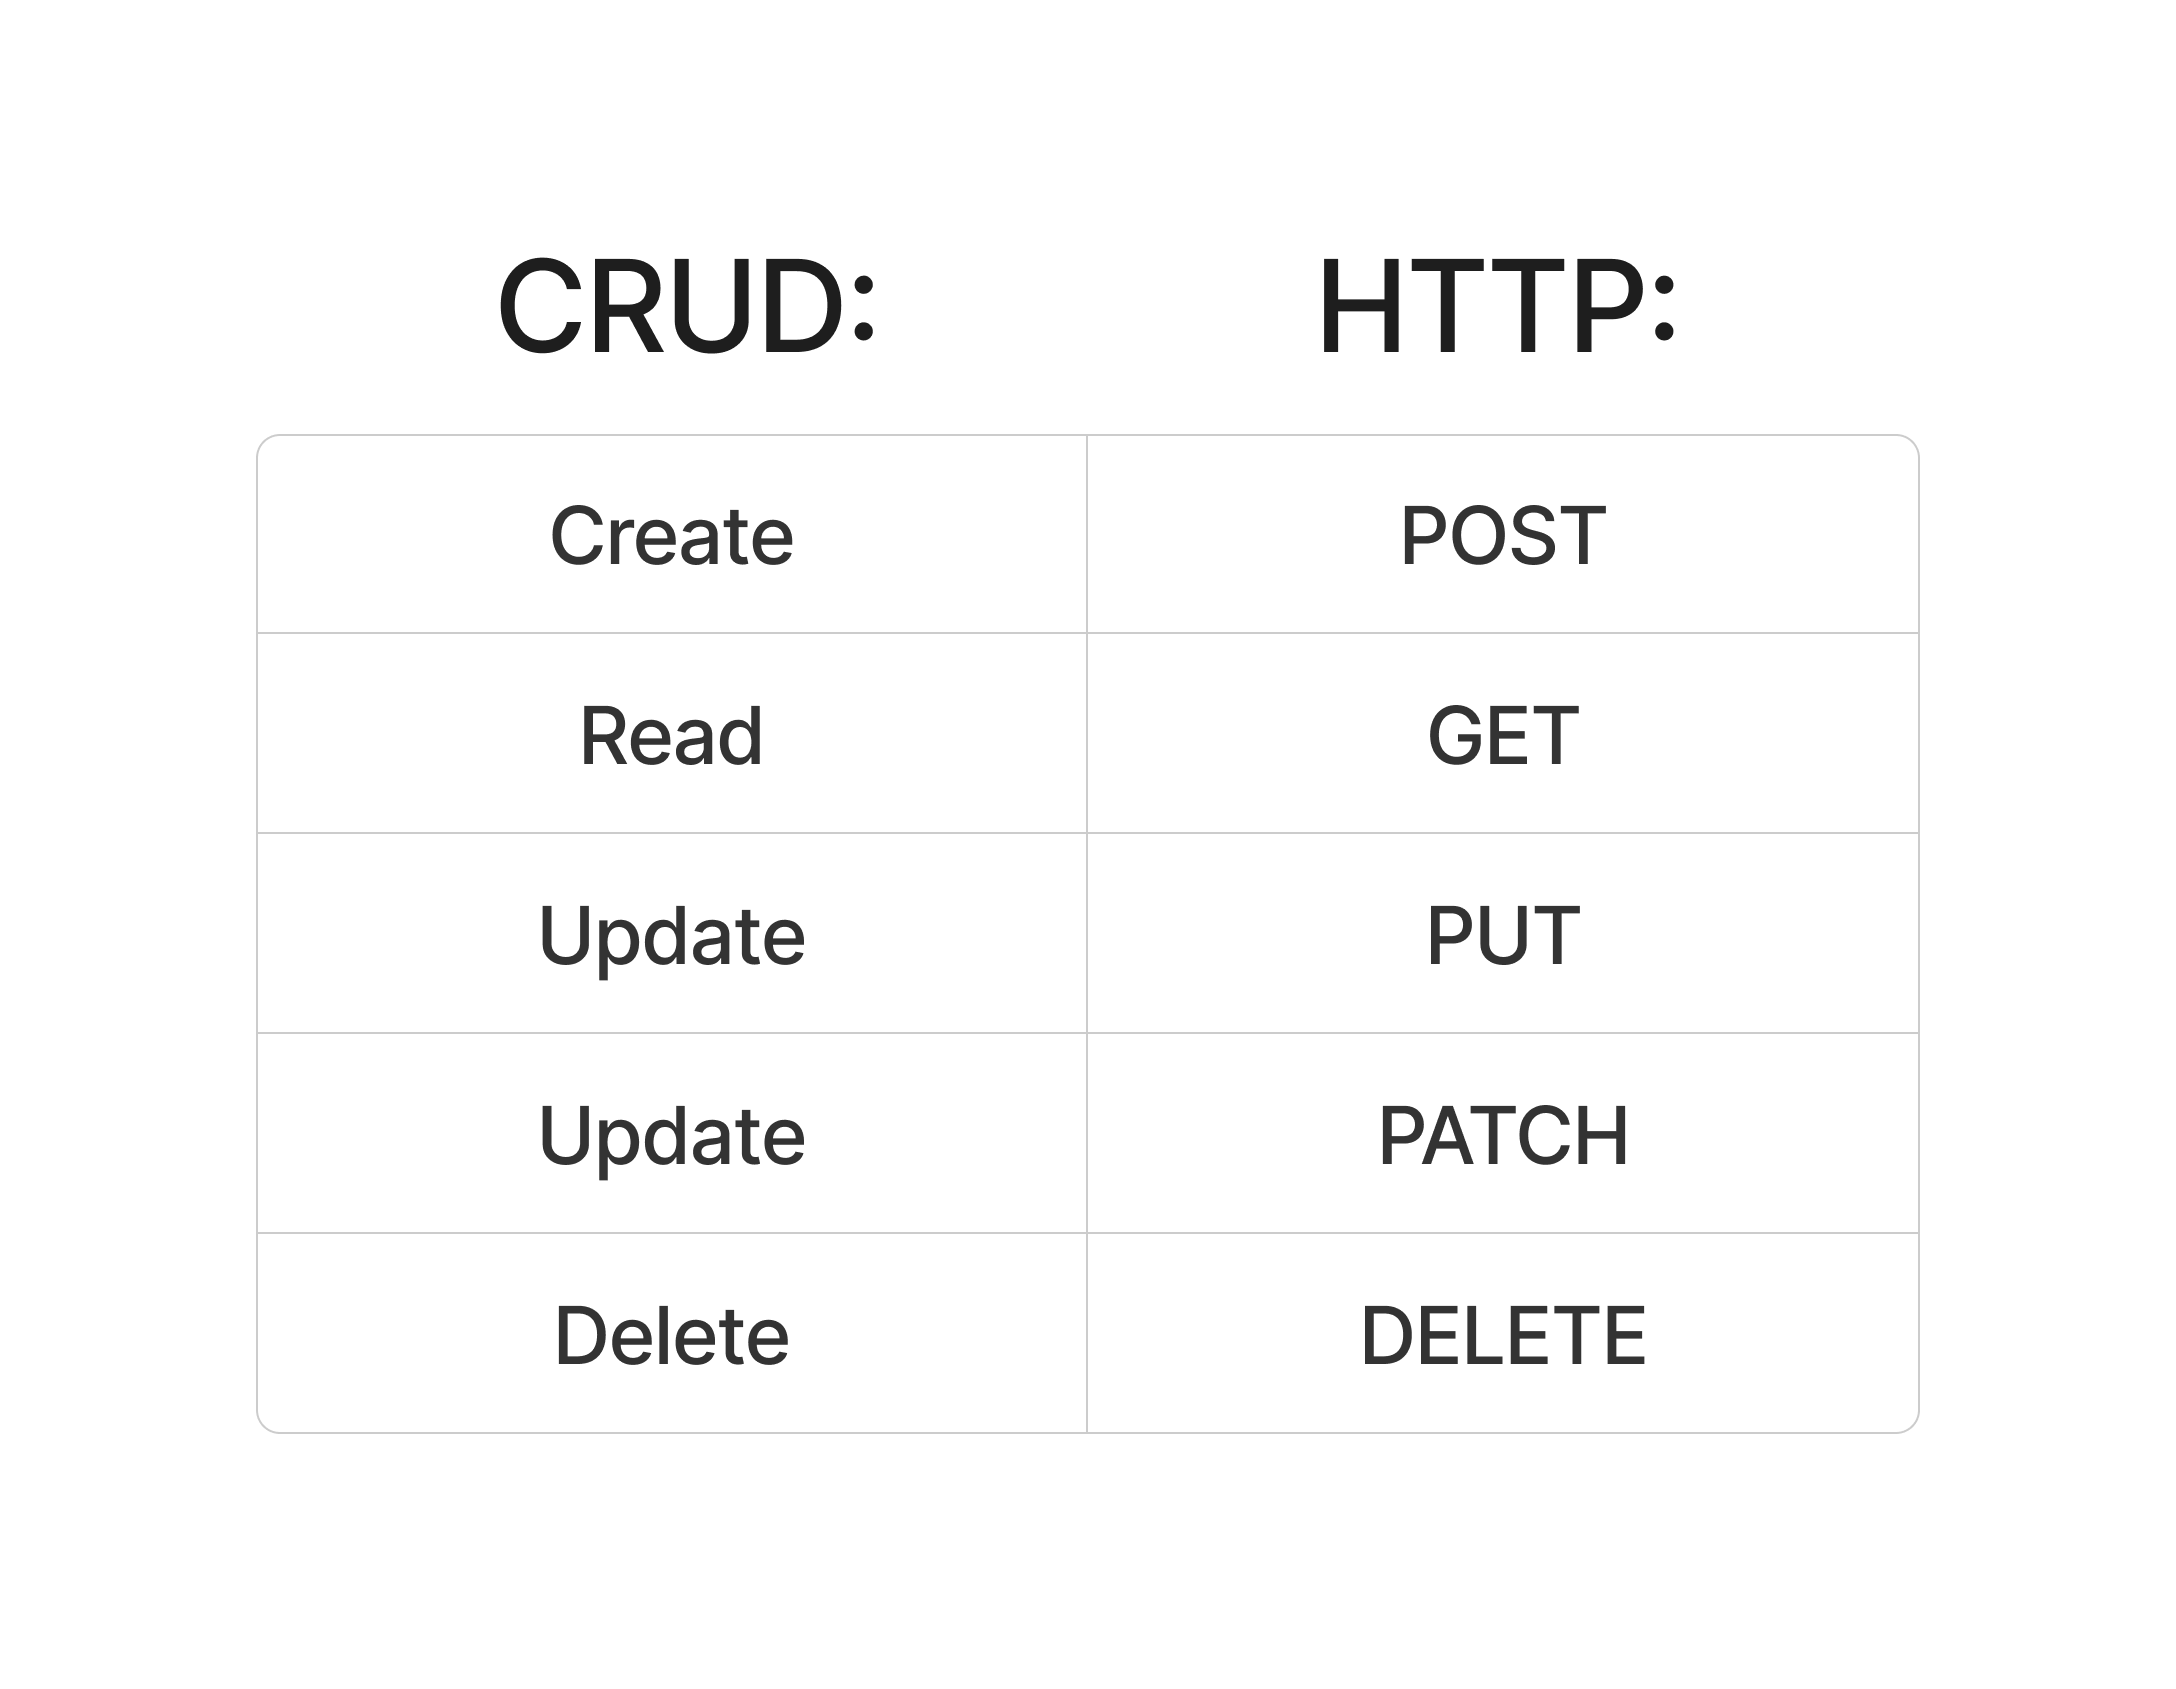 HTTP Methods and what CRUD operation they are (chart)